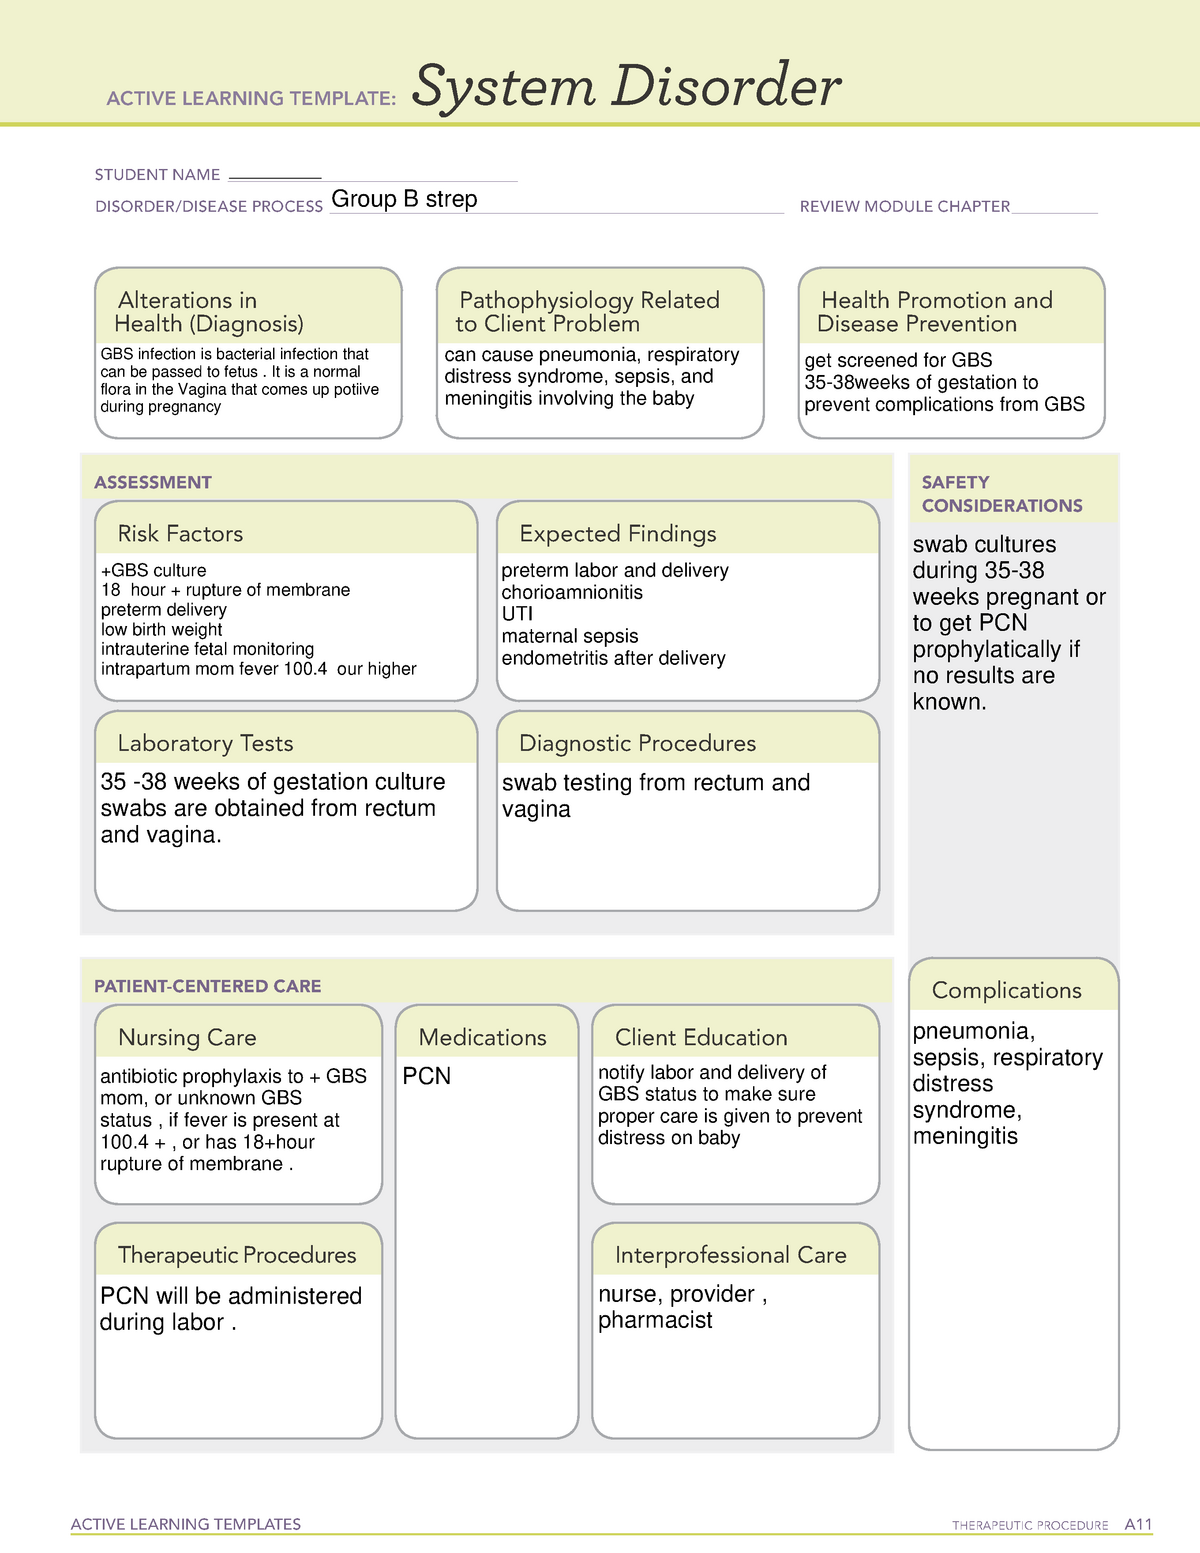 Docu gbs system disorder template for GBS ACTIVE LEARNING TEMPLATES